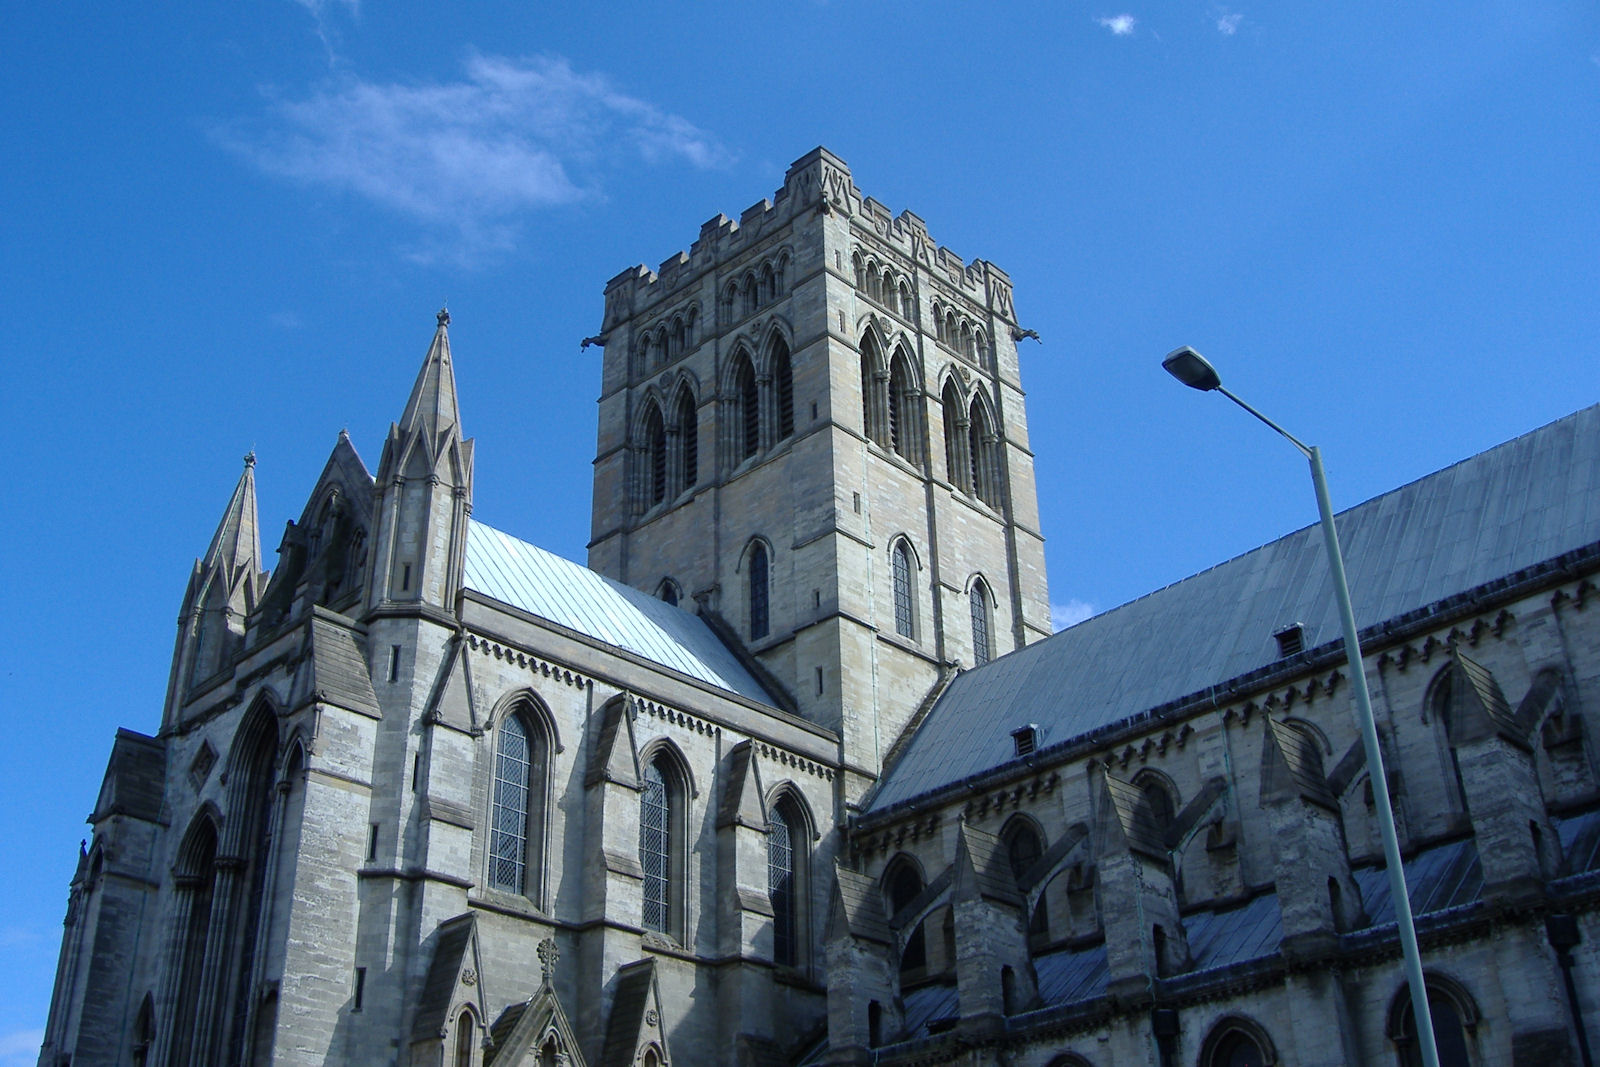 The Catholic Cathedral Church of St John the Baptist in Norwich, England.